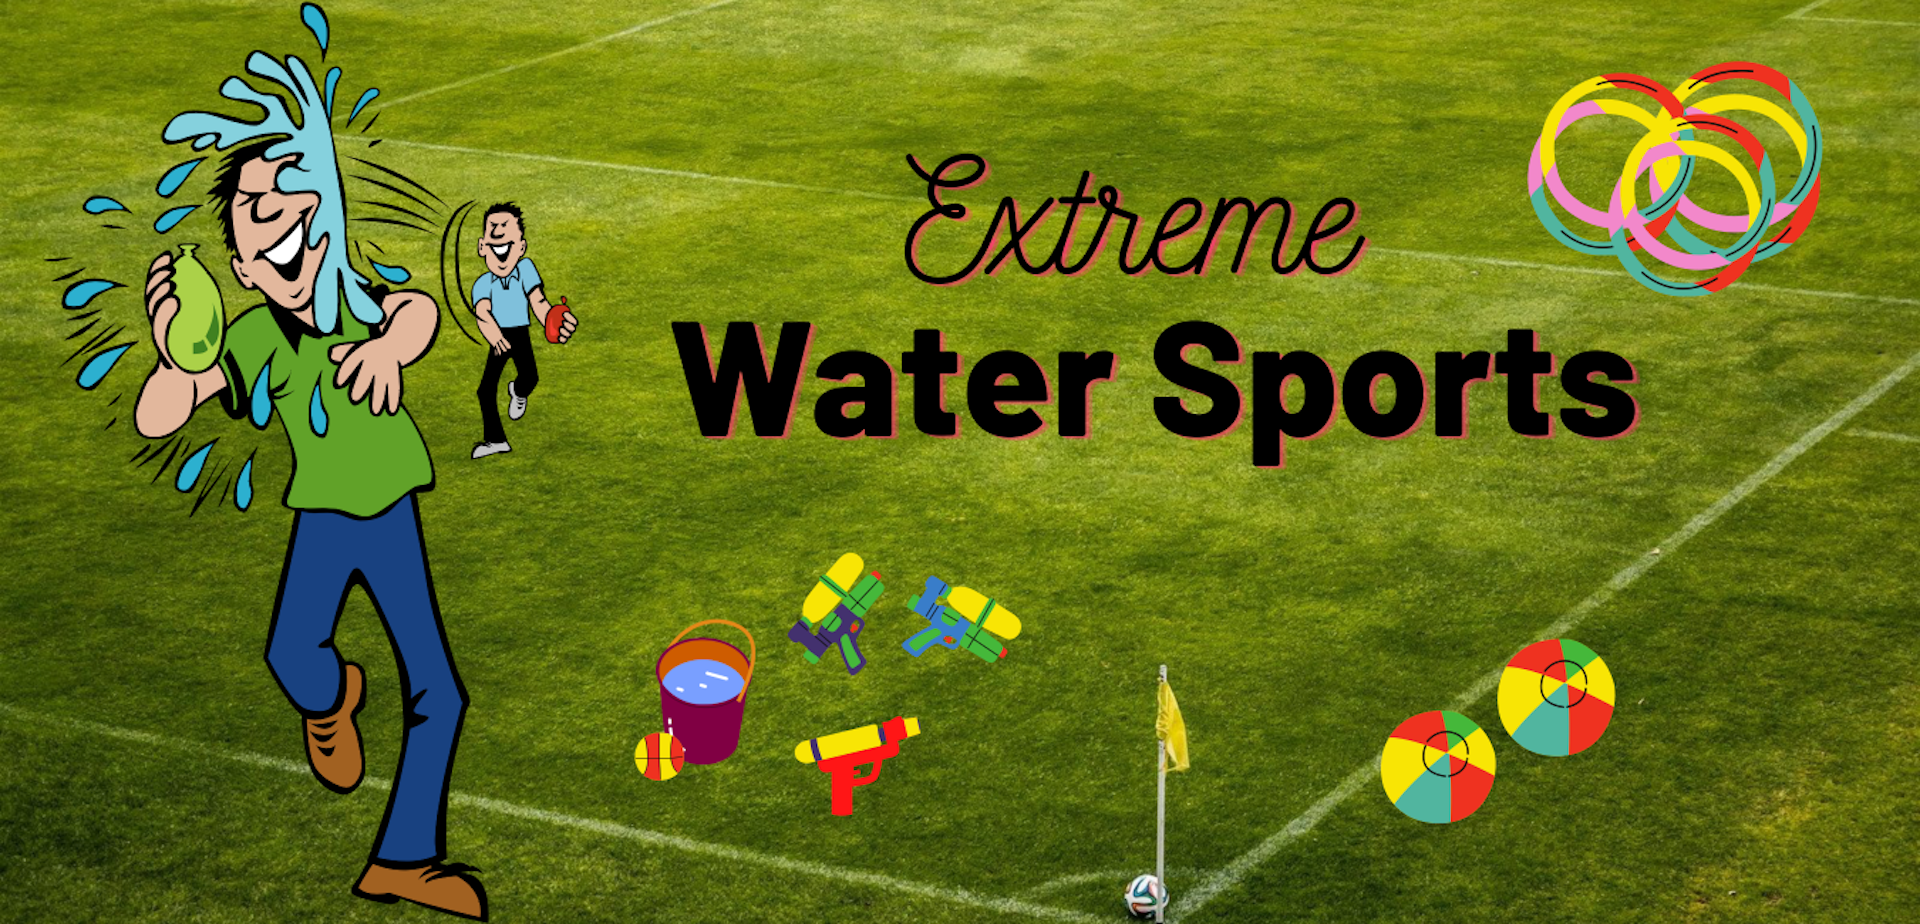 Extreme Water Sports image